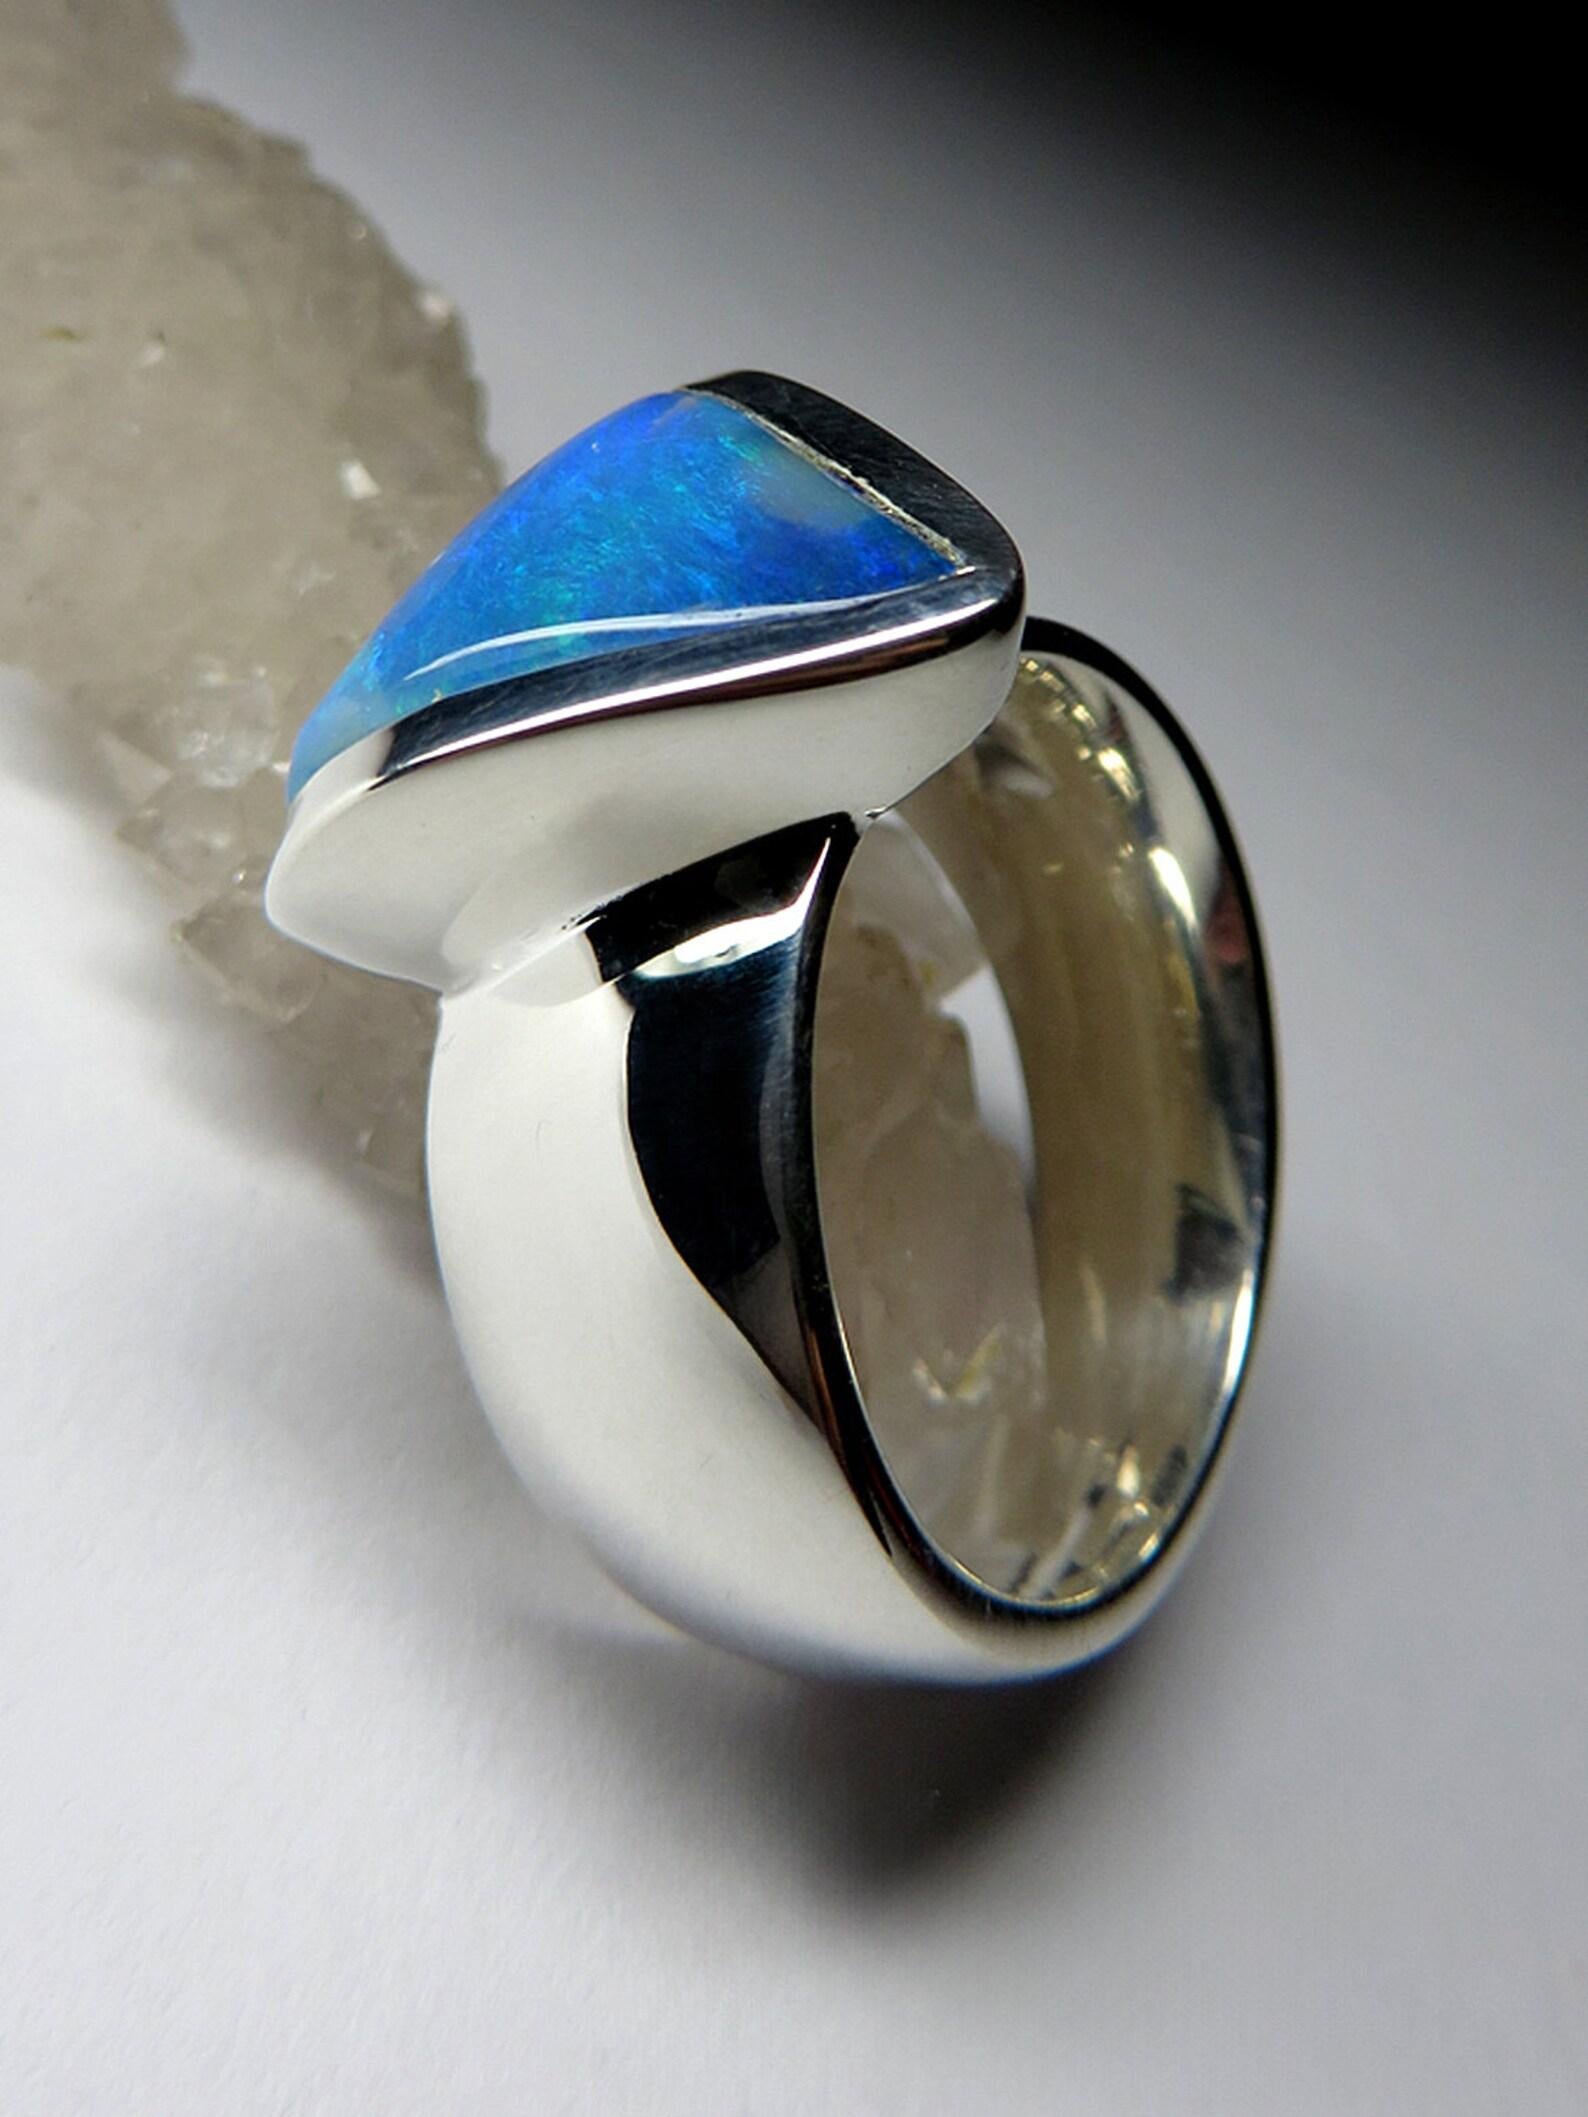 For Sale:  Blue Boulder Opal ring Avatar Unisex natural opal ring Genuine opal jewelry 9